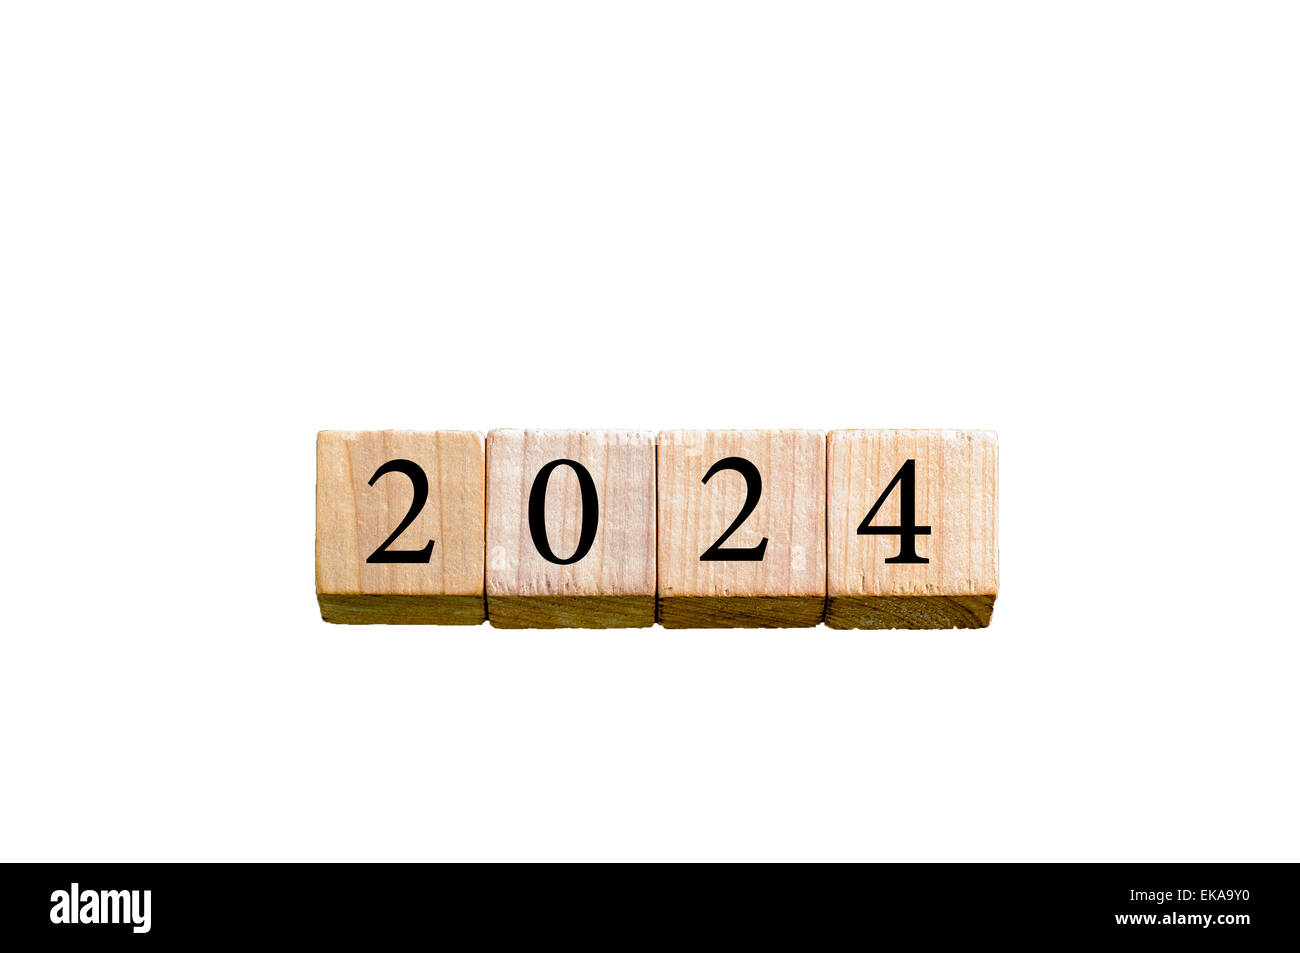 Year 2024 Wooden Small Cubes With Numbers Isolated On White Background EKA9Y0 